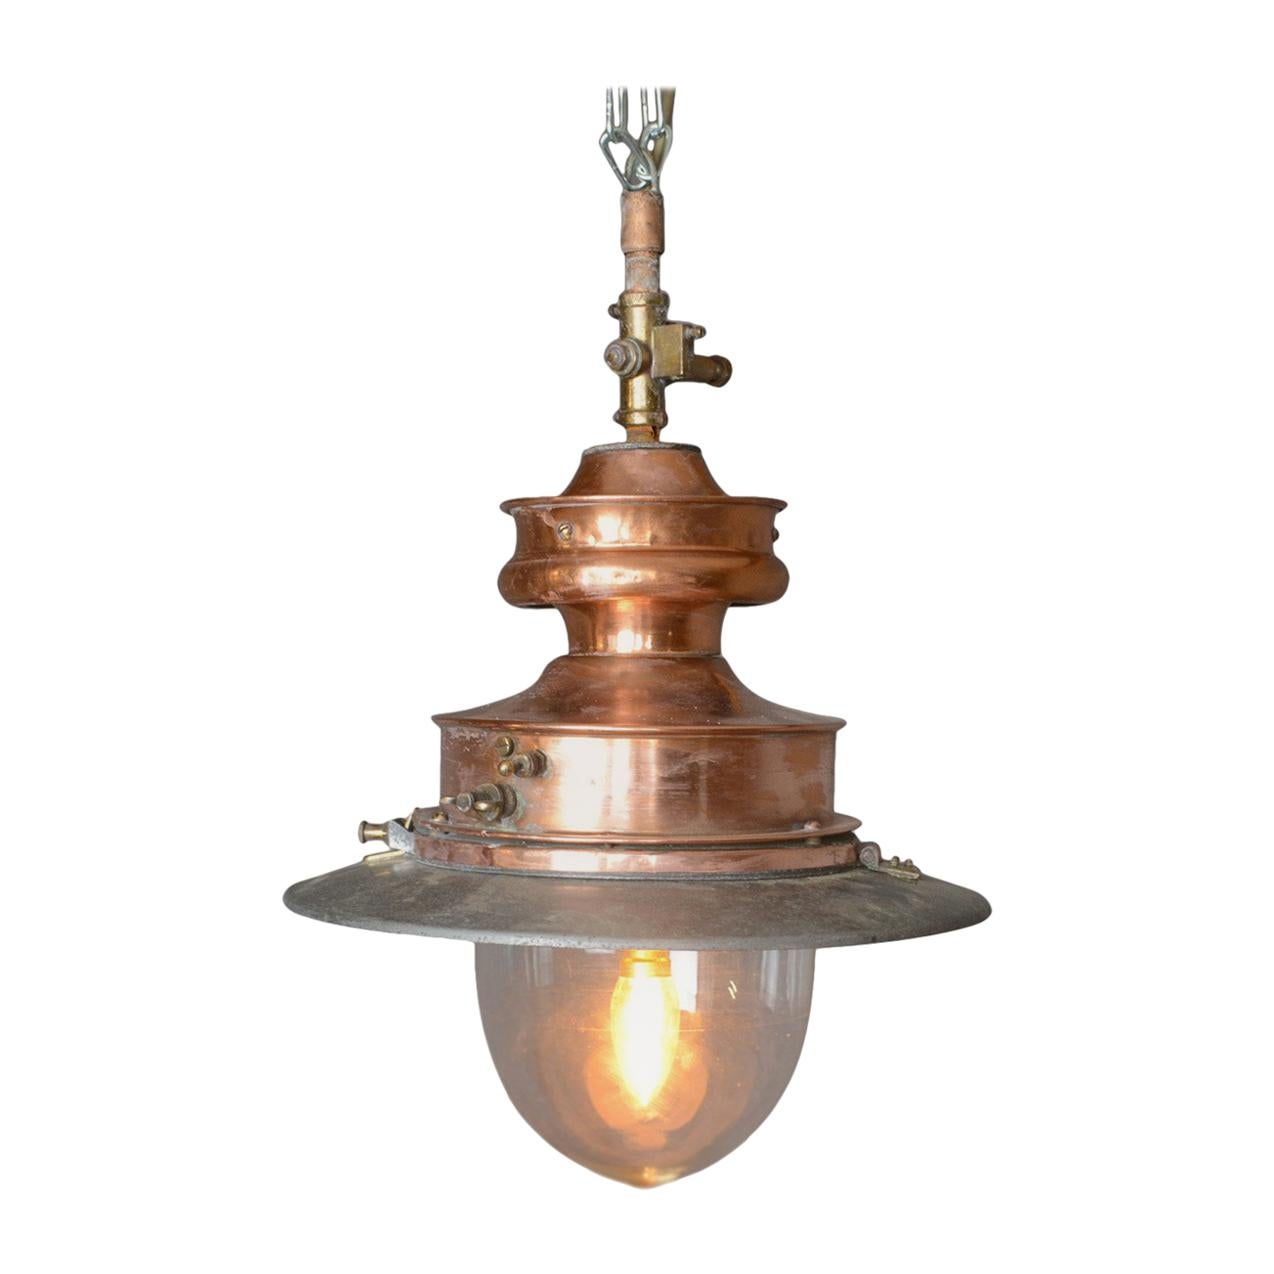 Antique Gas Lamp, Converted for Modern Home, English, 19th Century, circa 1880